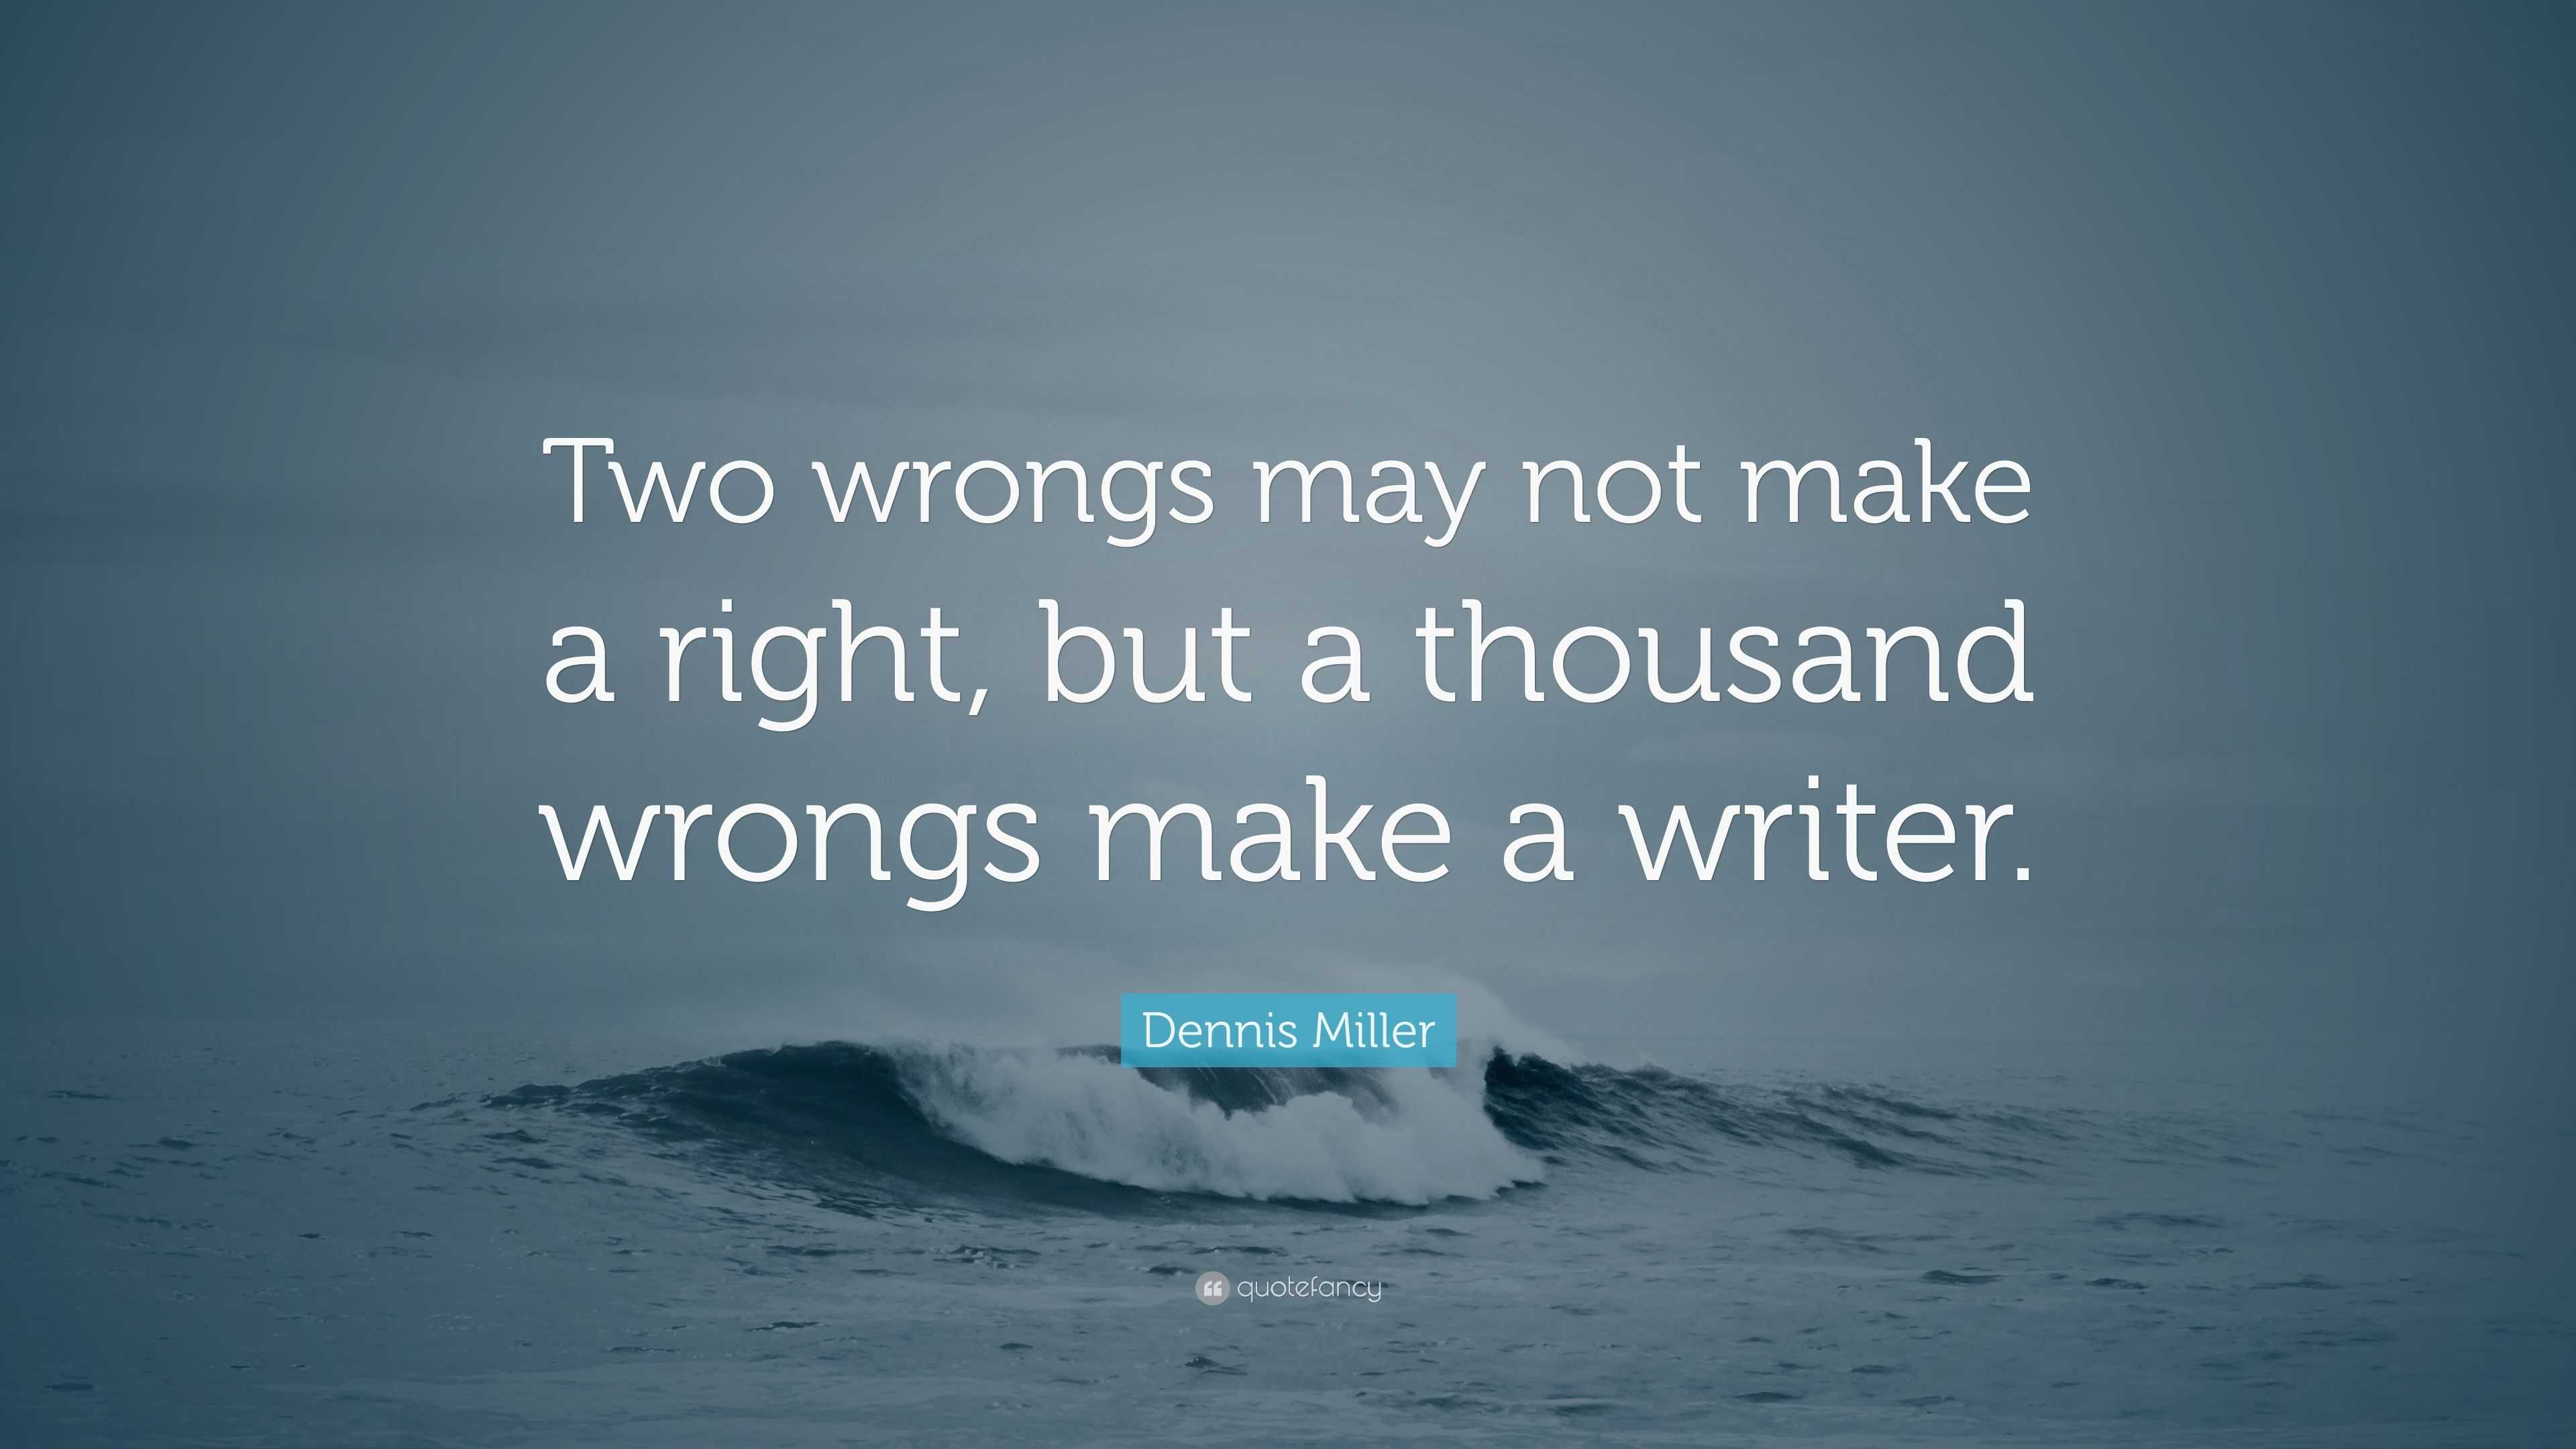 Dennis Miller Quote: “Two wrongs may not make a right, but a thousand ...